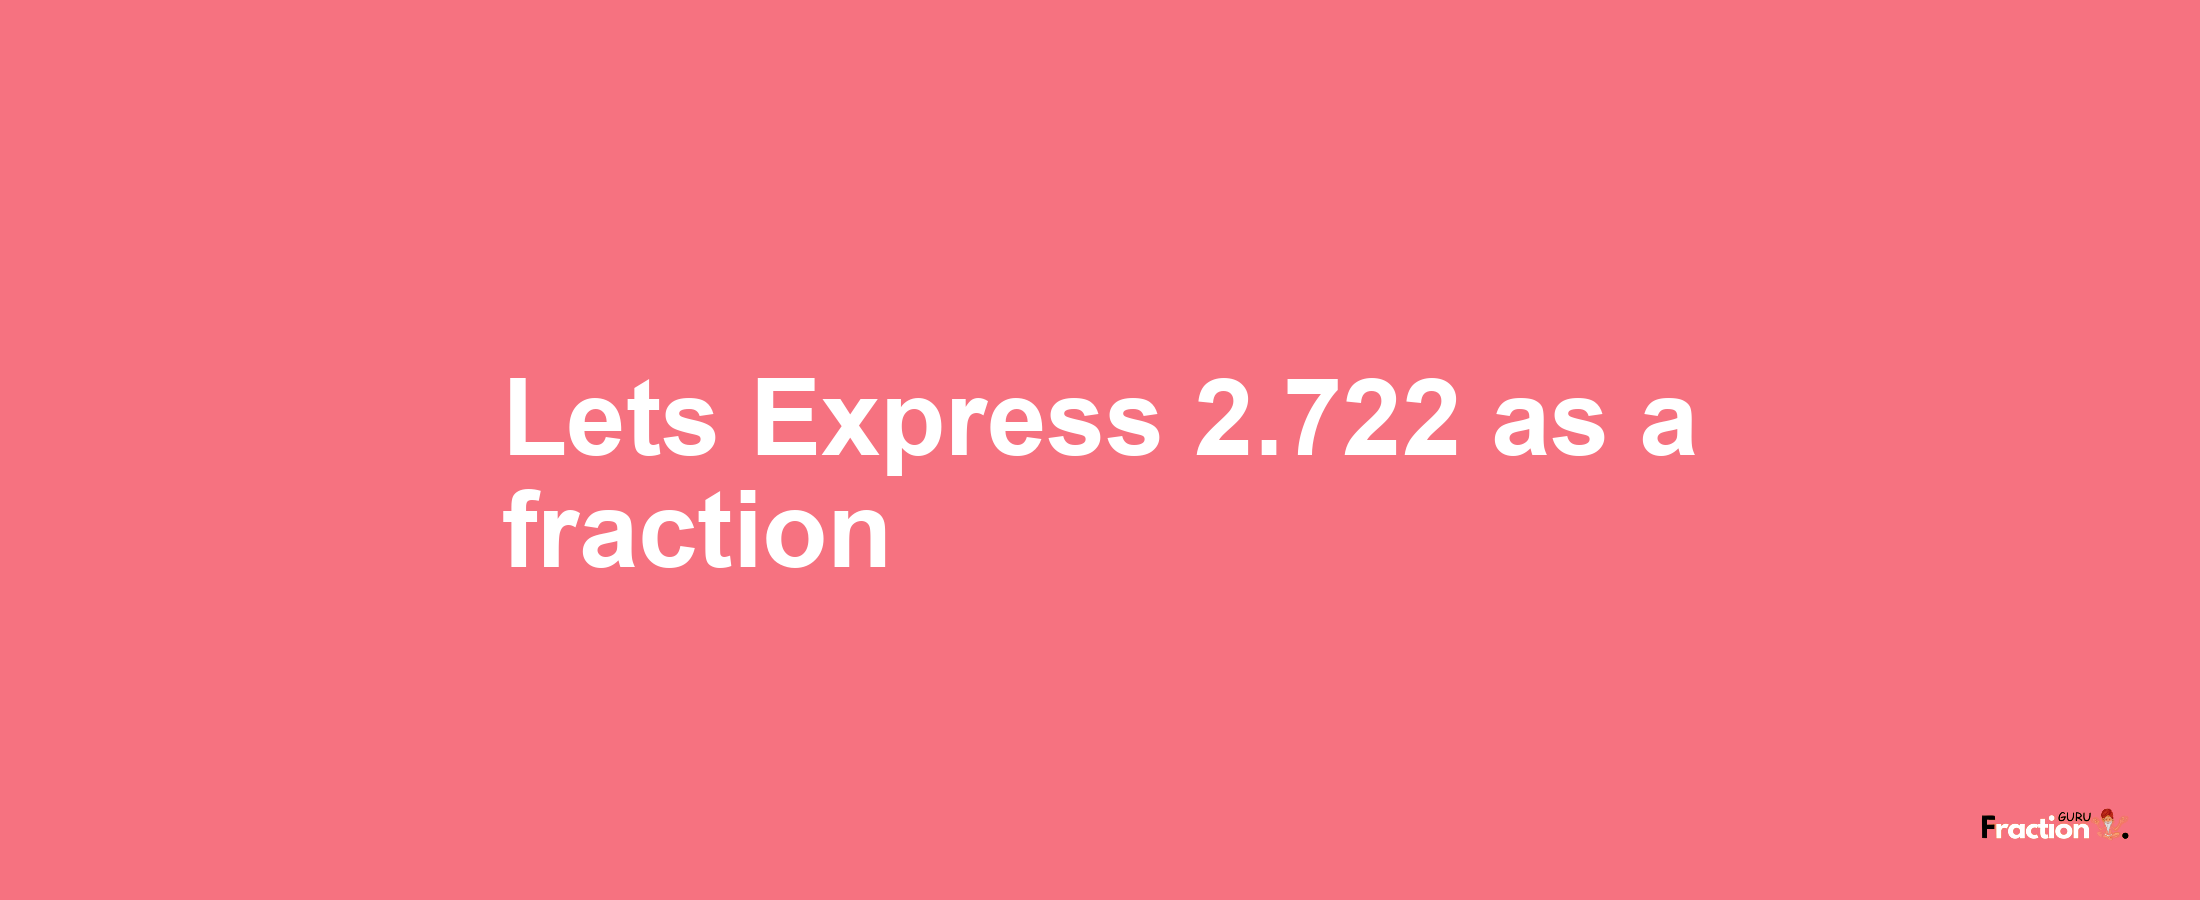 Lets Express 2.722 as afraction